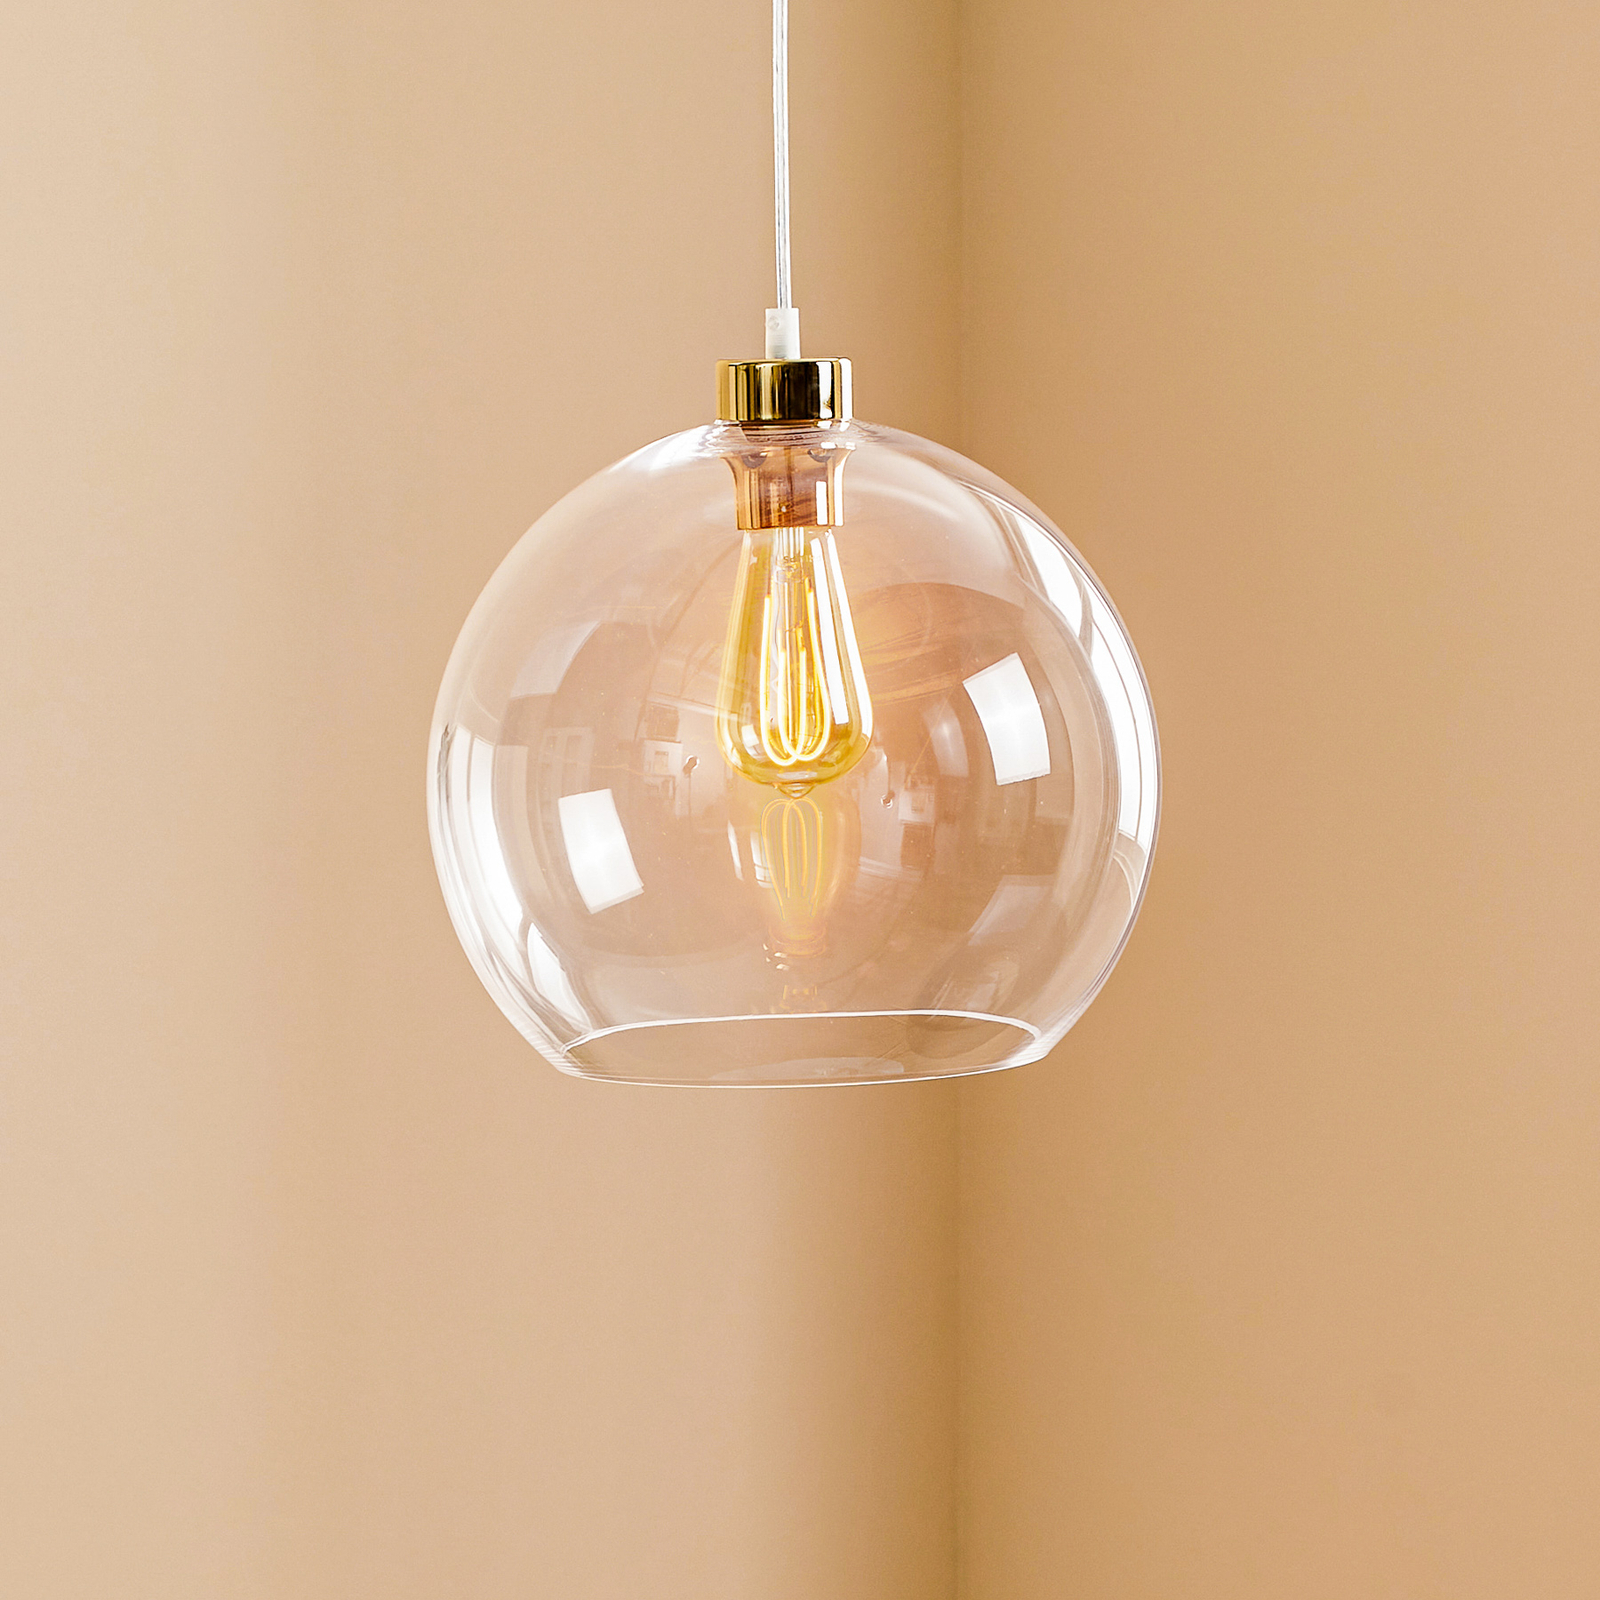 Cubus hanging light, one-bulb, white